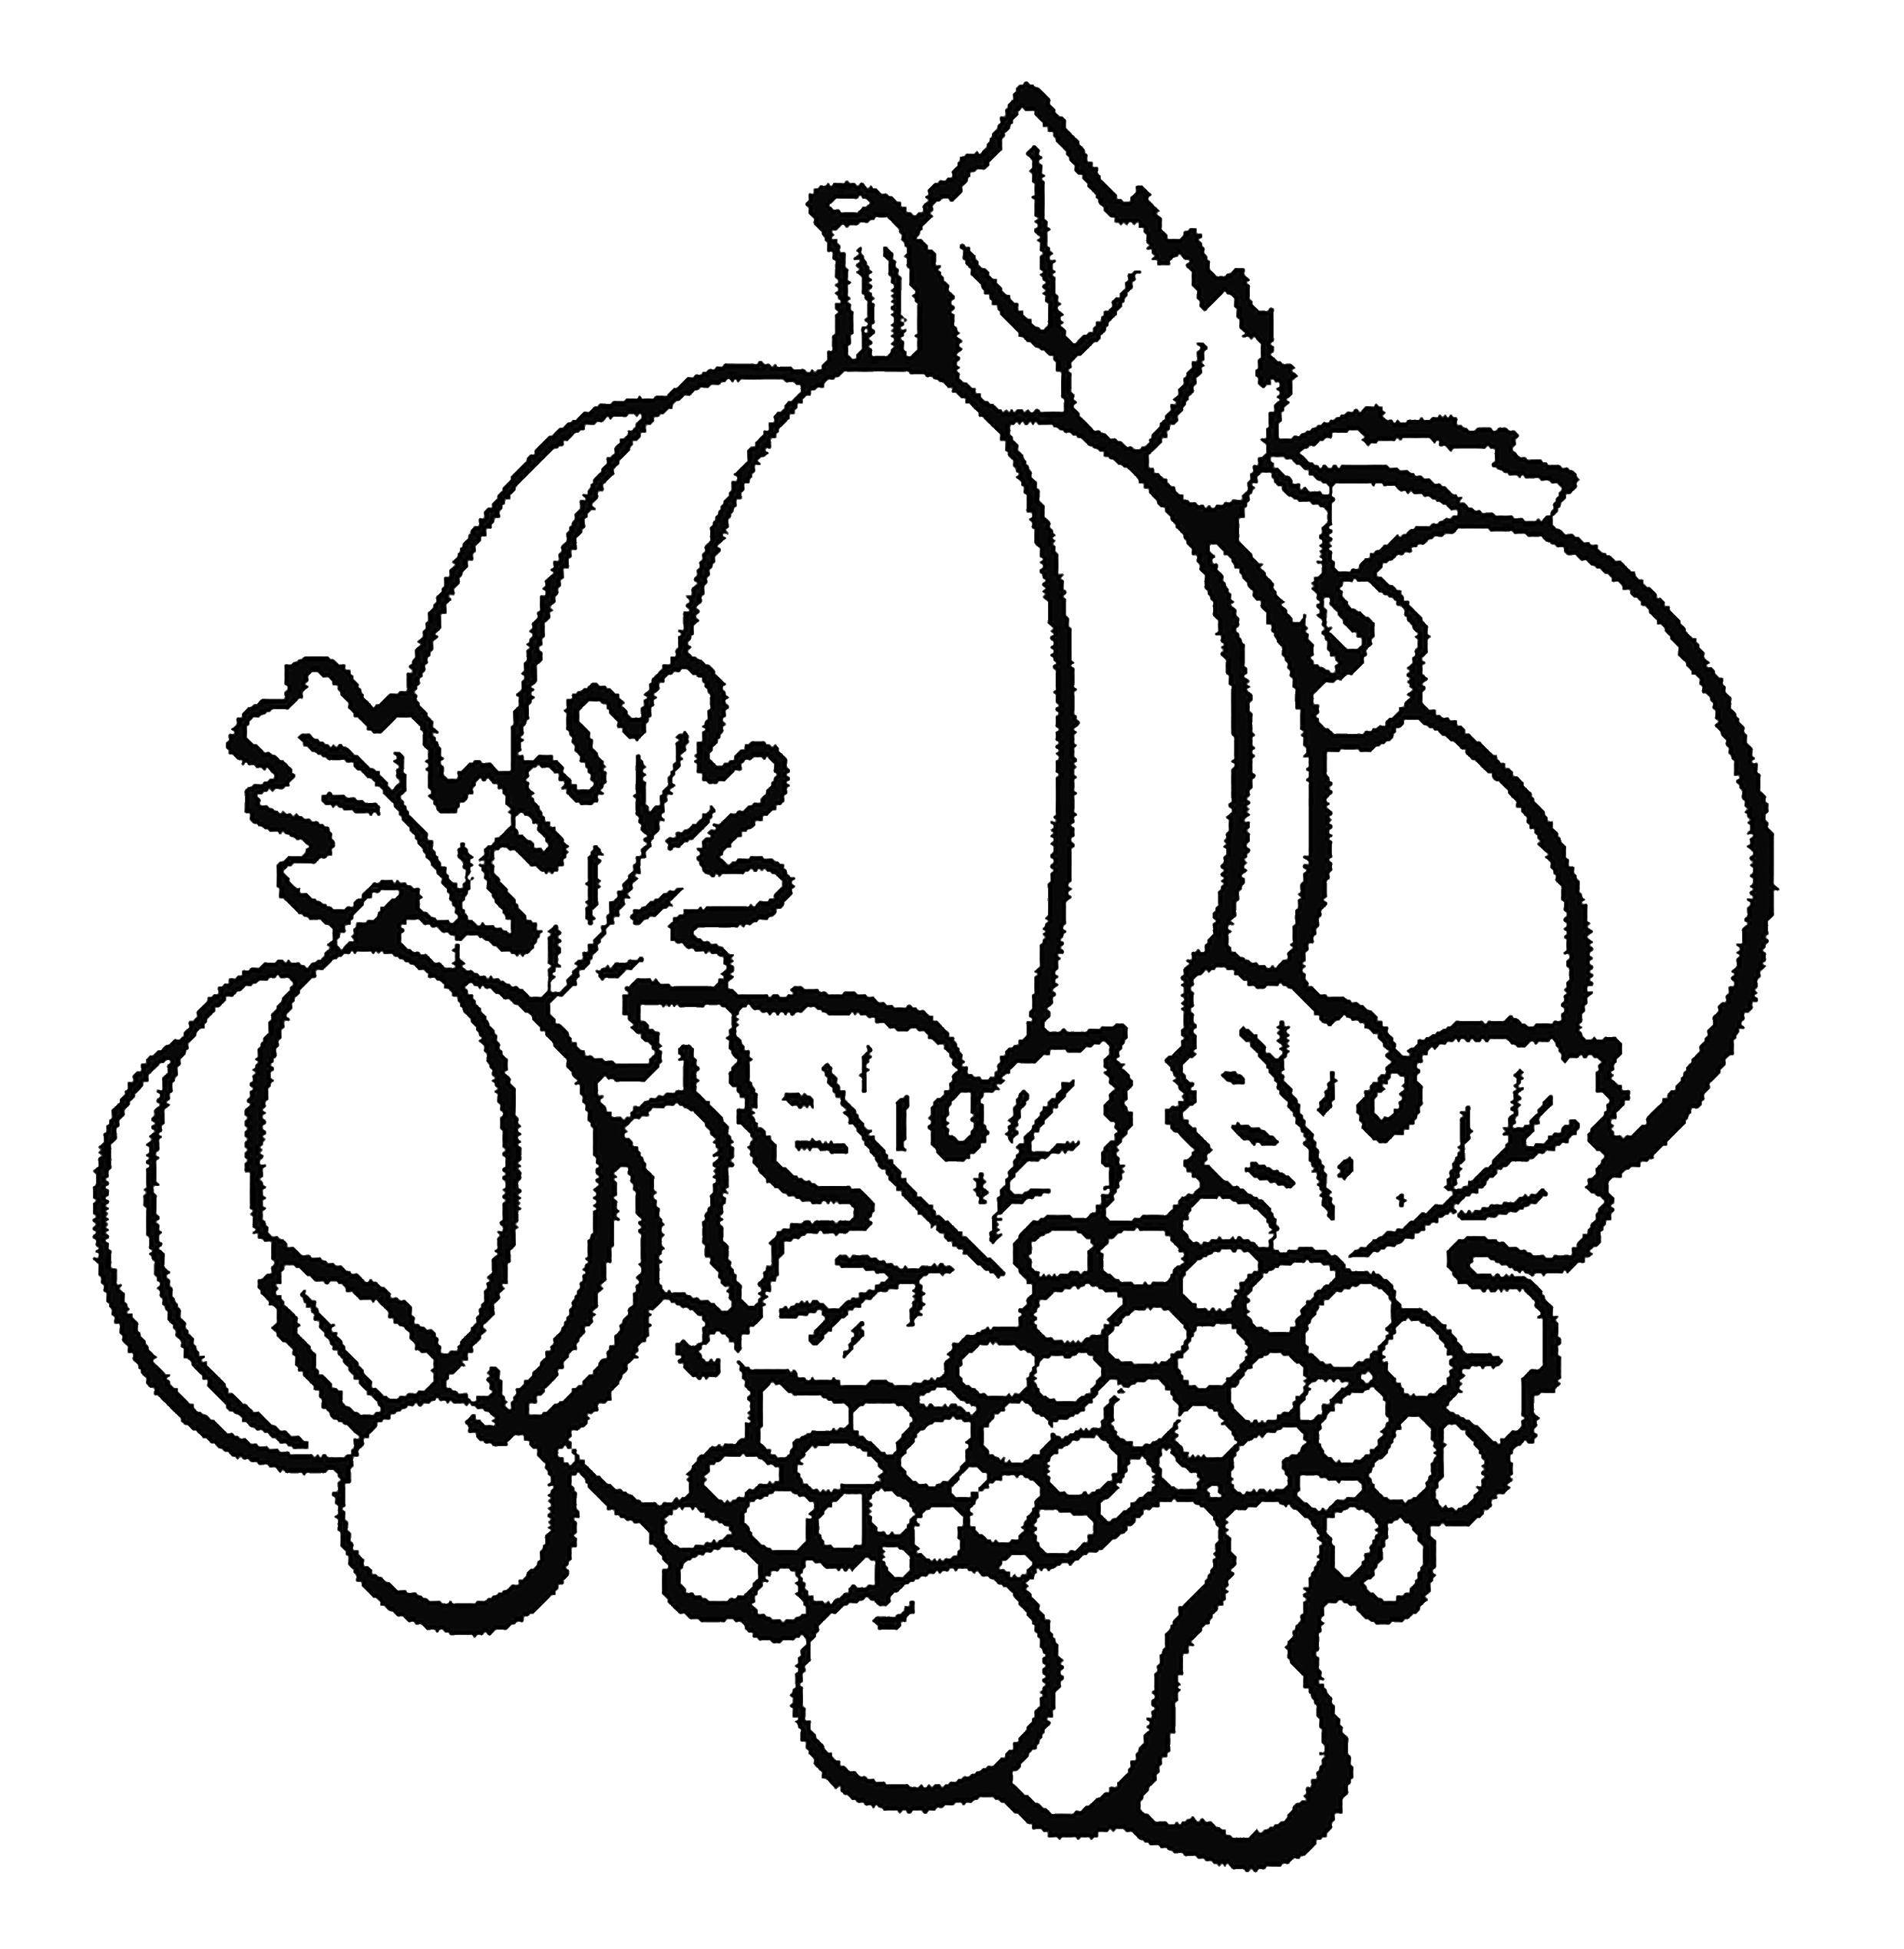 Coloring Pumpkin and fruits. Category vegetables. Tags:  pumpkin.